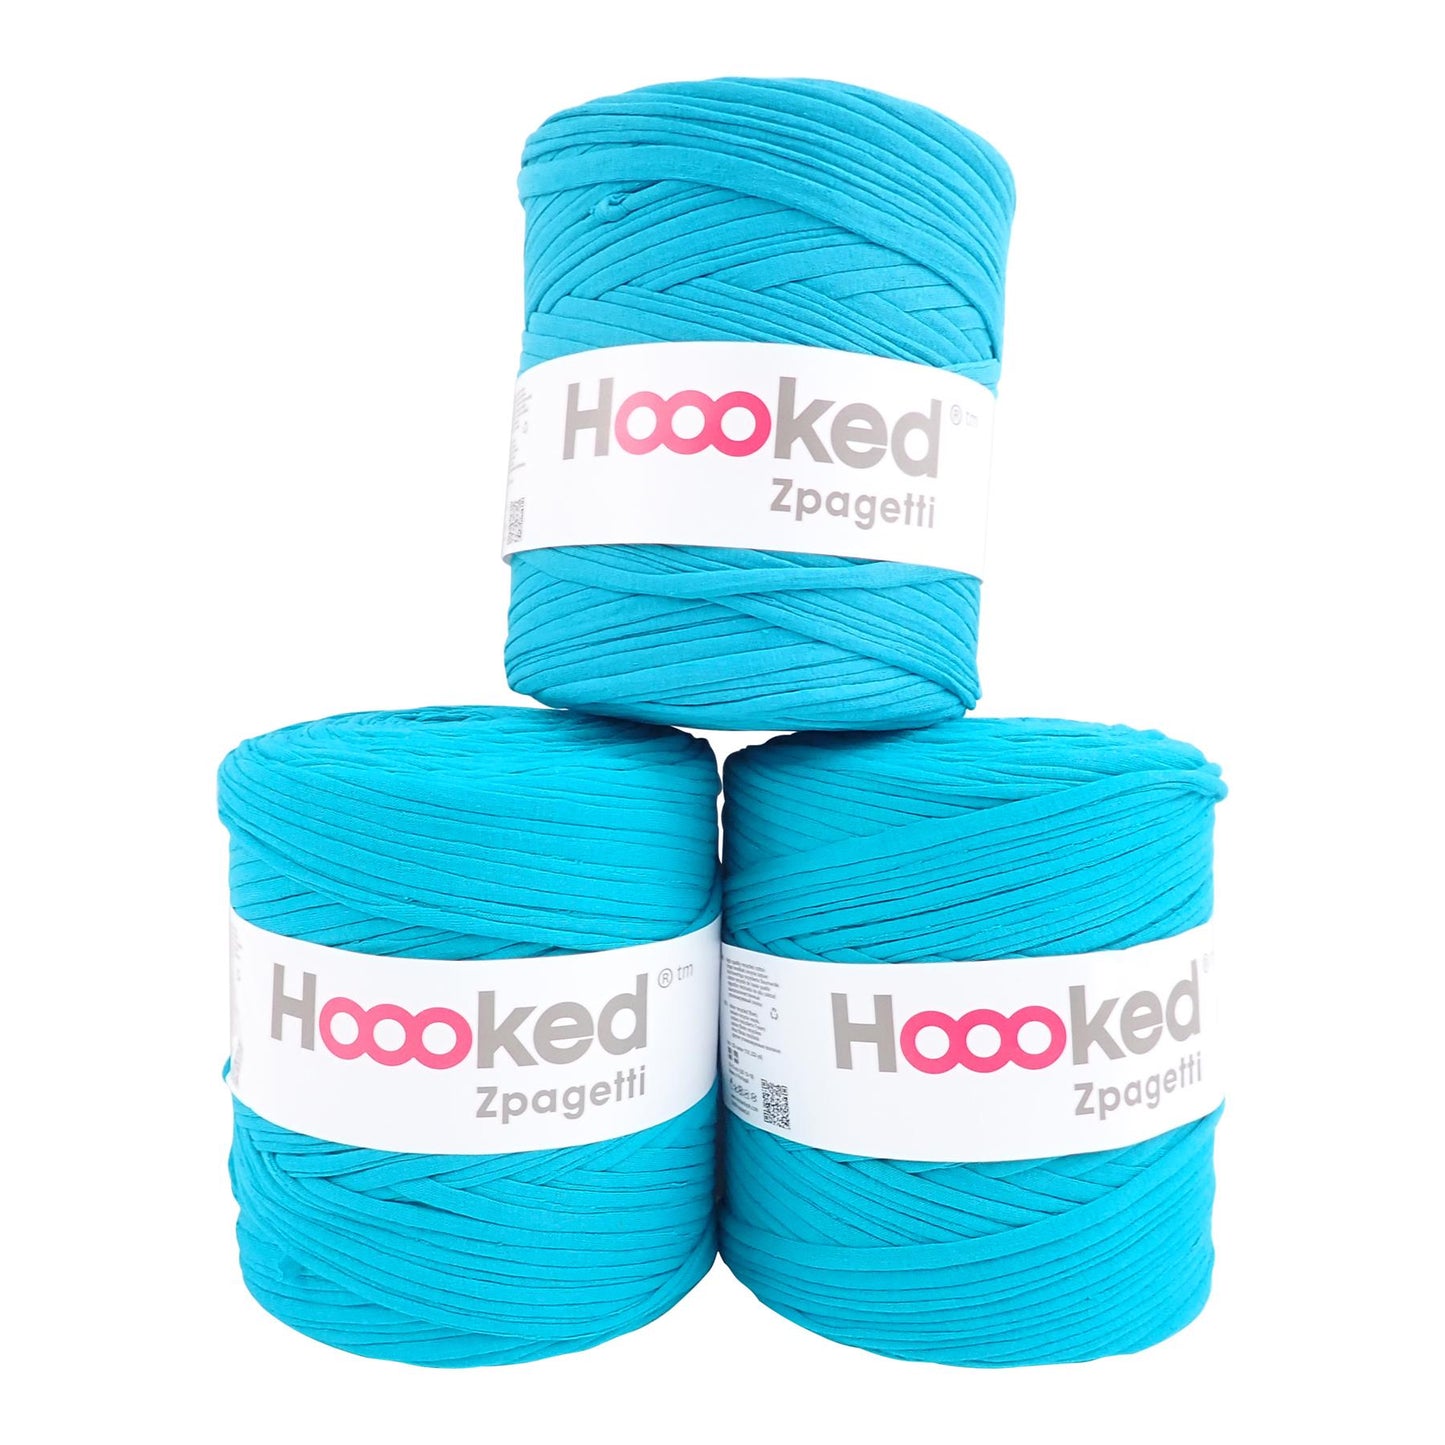 Hoooked Zpagetti Turquoise Cotton T-Shirt Yarn - 120M 700g (Pack of 3)